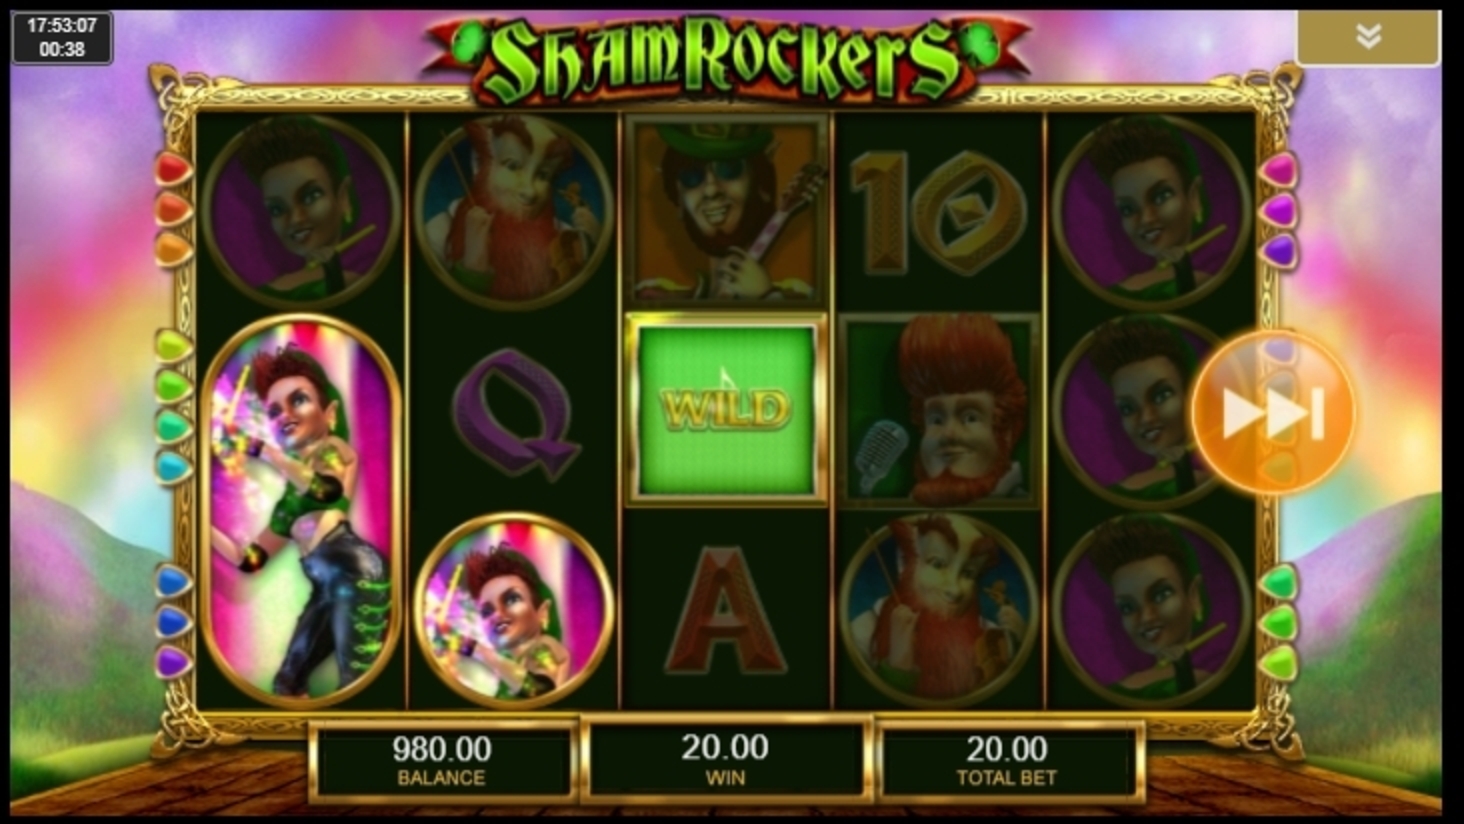 Win Money in Shamrockers Eire to Rock Free Slot Game by IGT